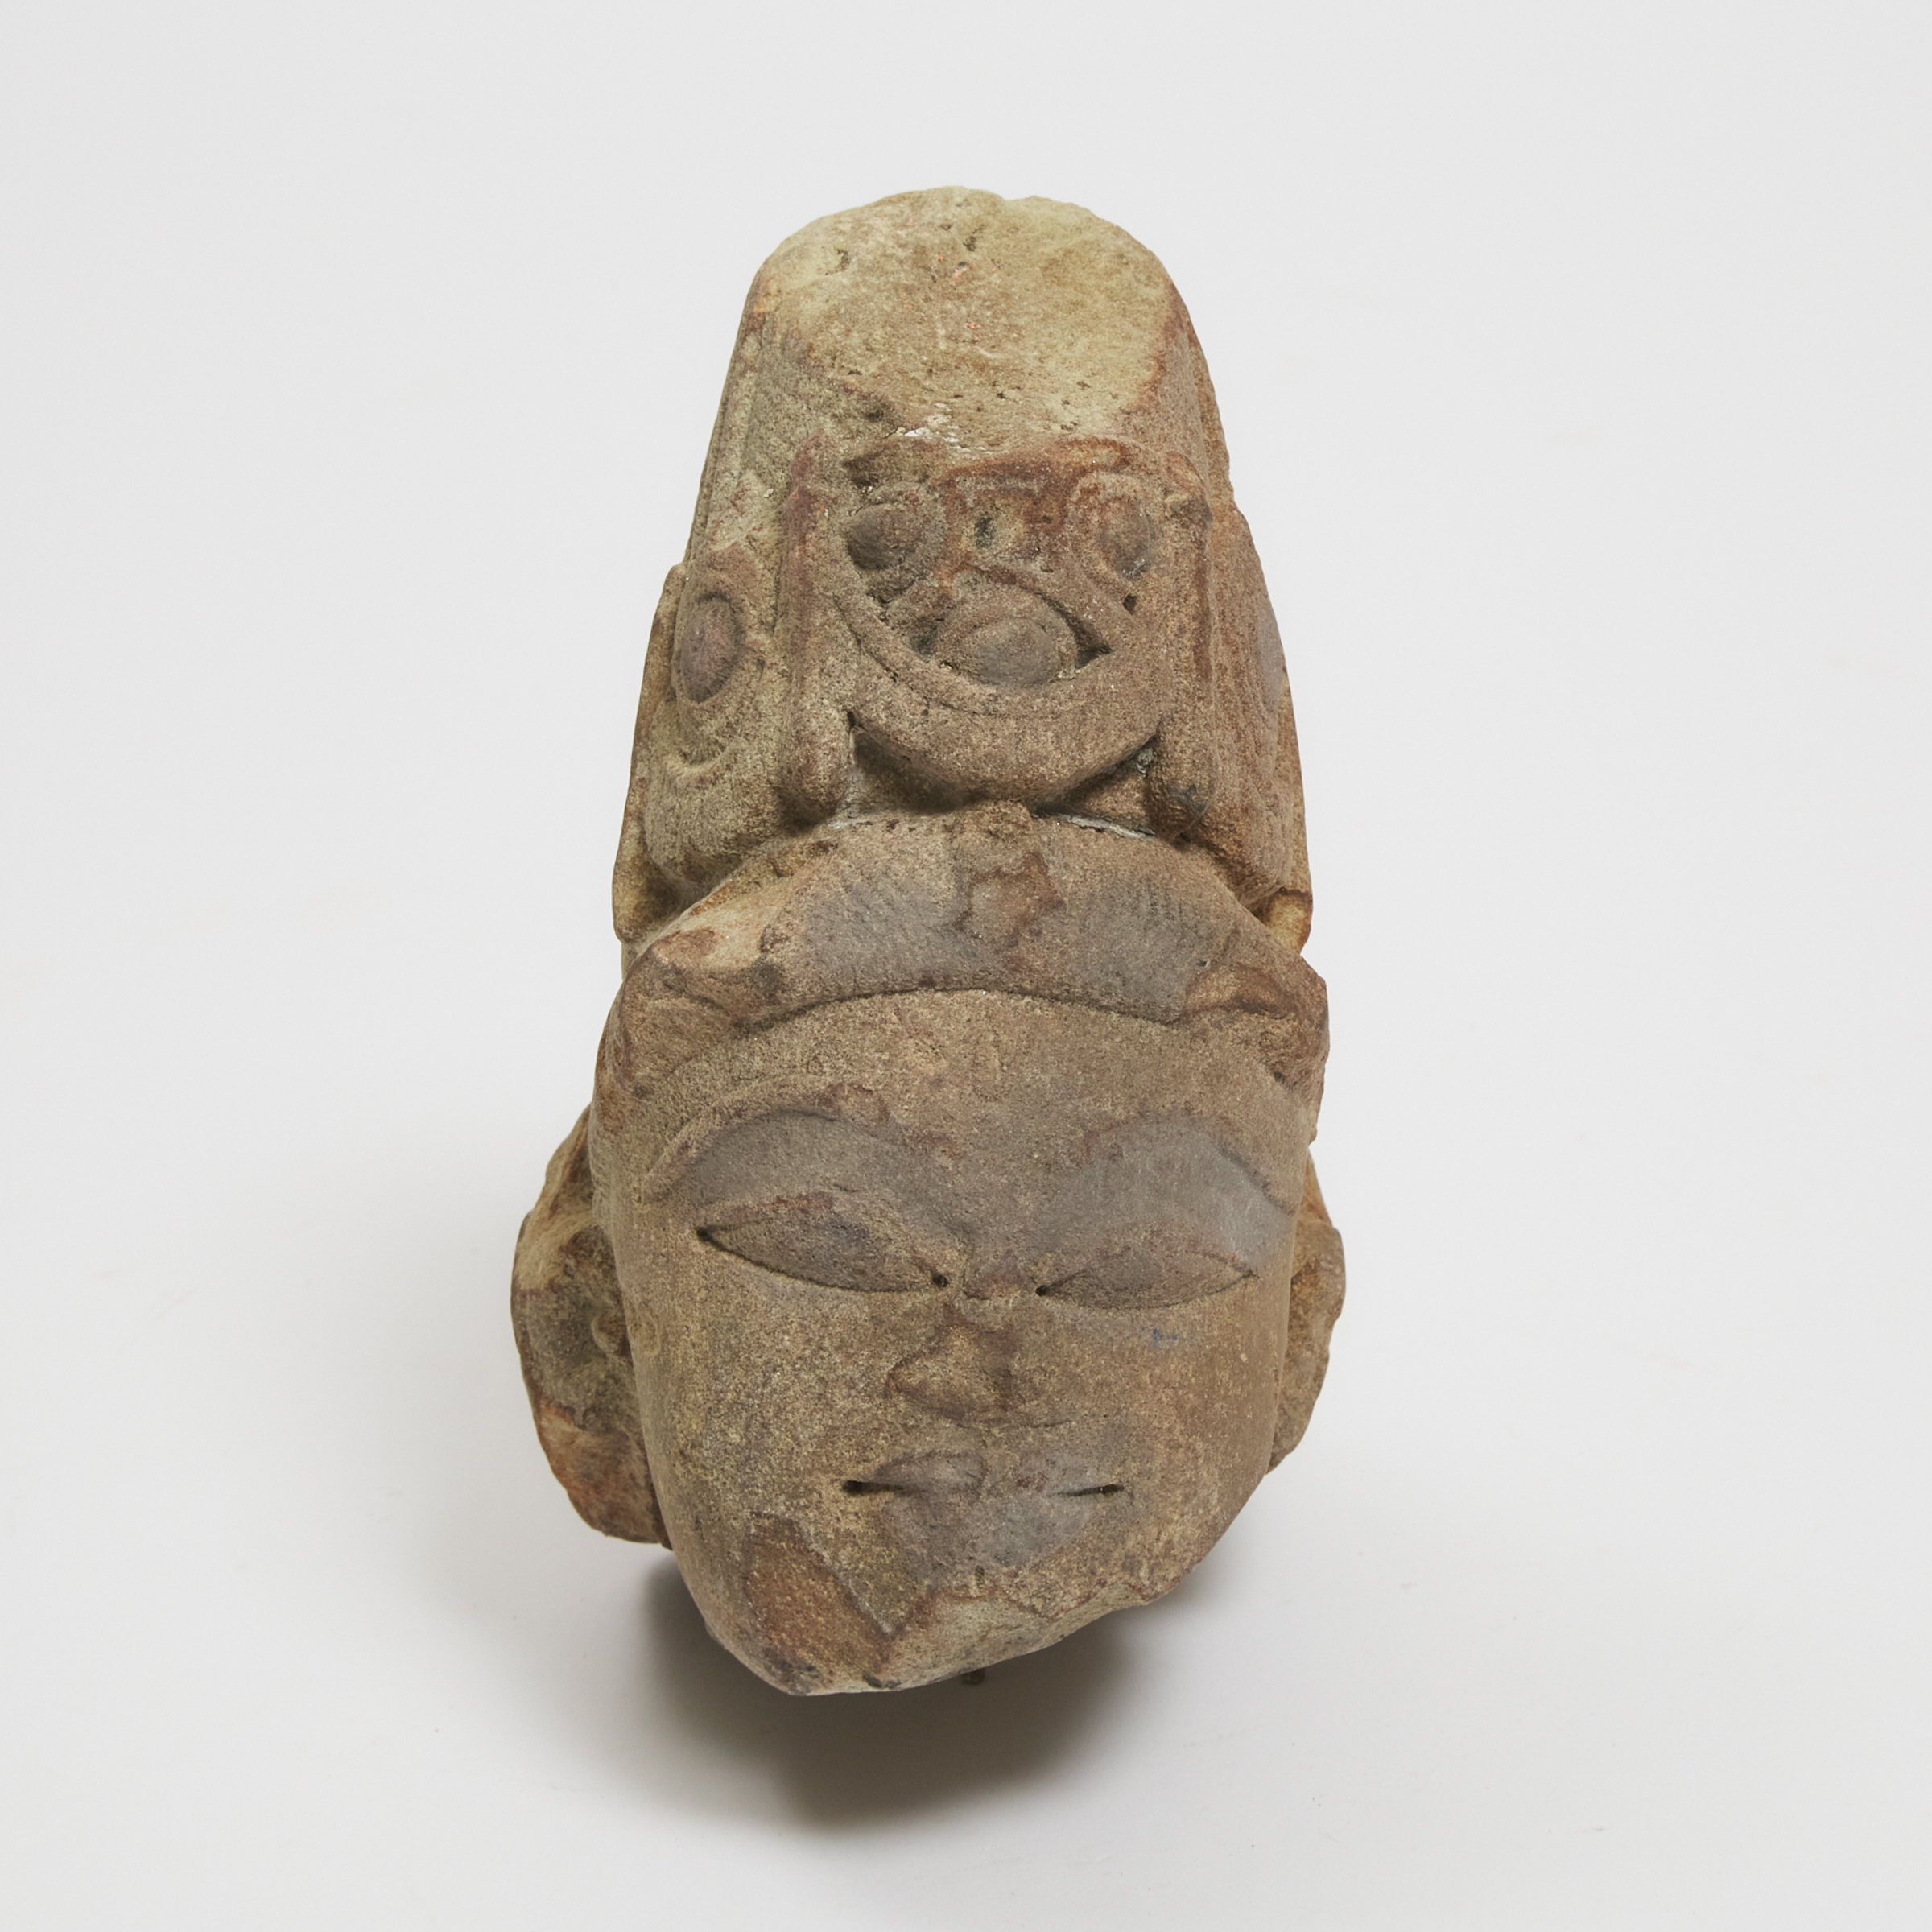 Indonesian Stone Head 4th to 7th 3ab7f8